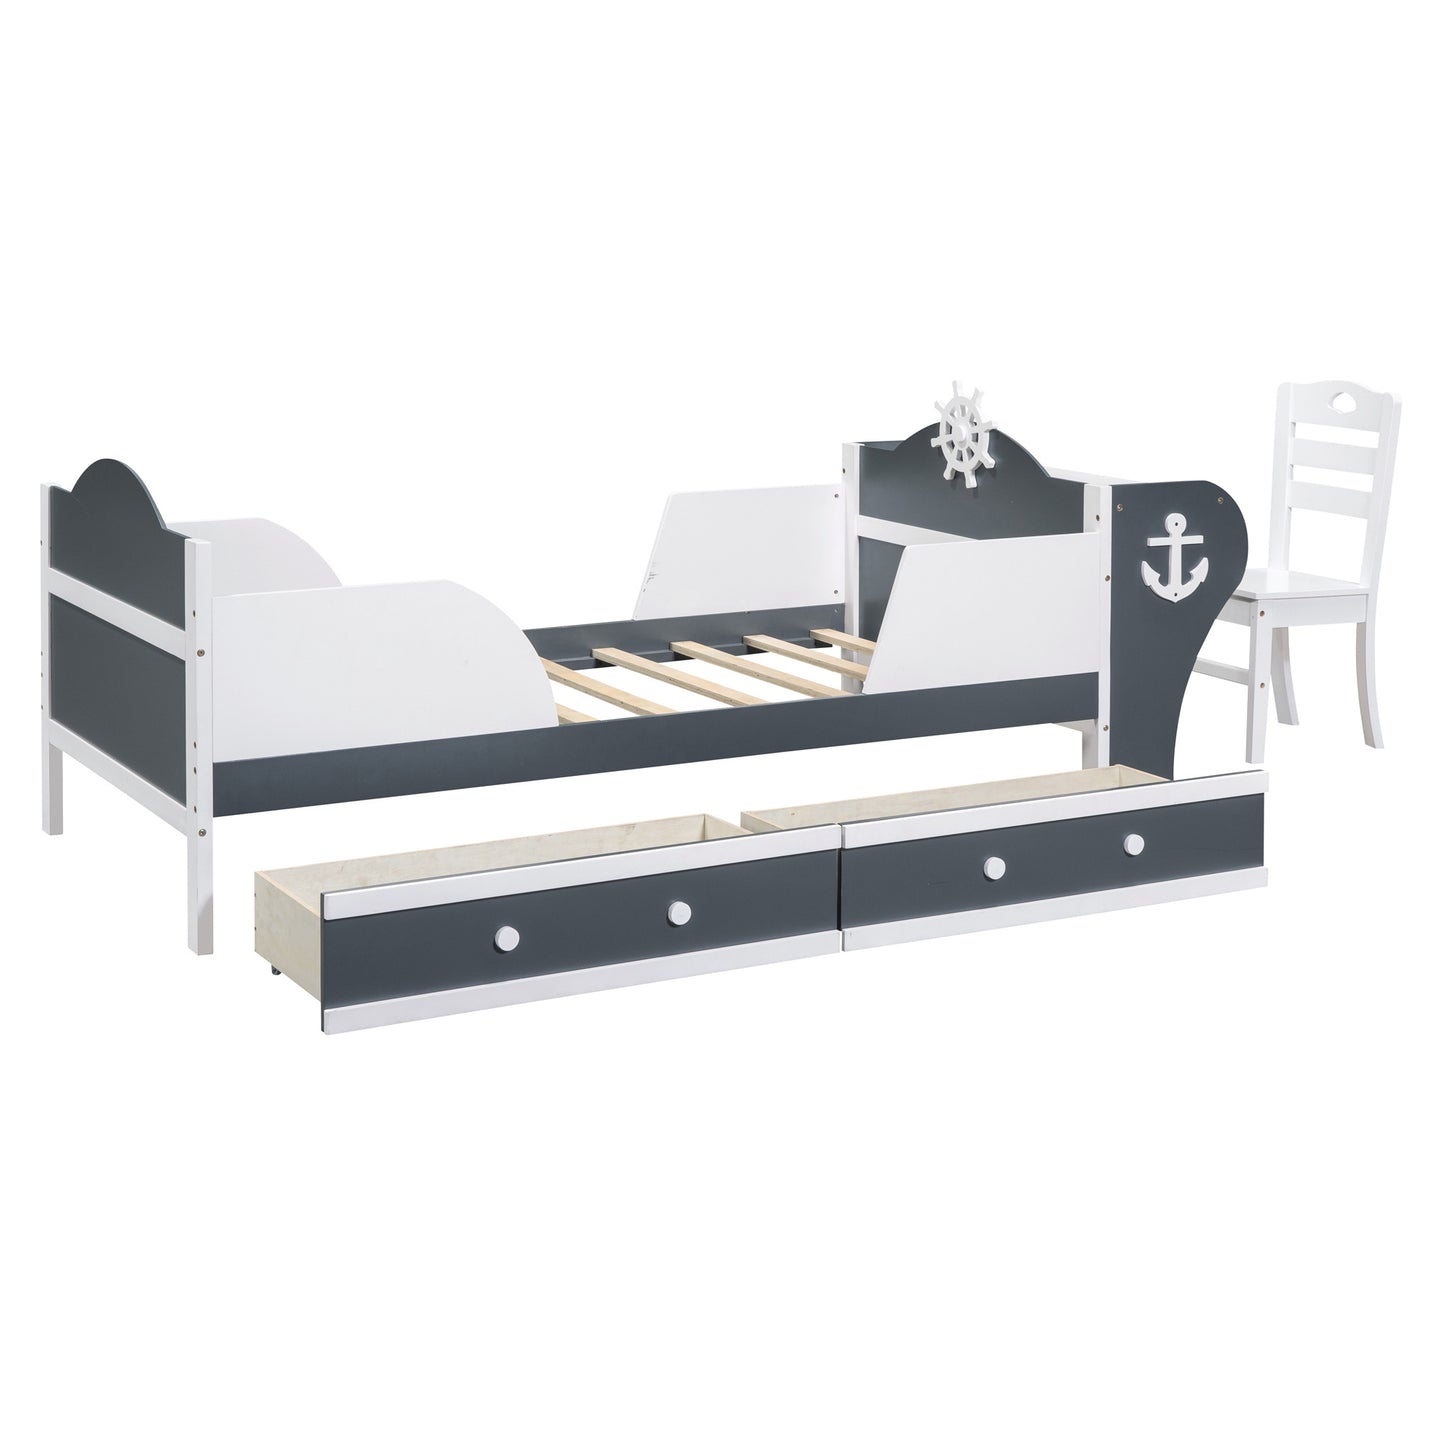 boat-shaped platform bed with two drawers, desk and chair, white+gray